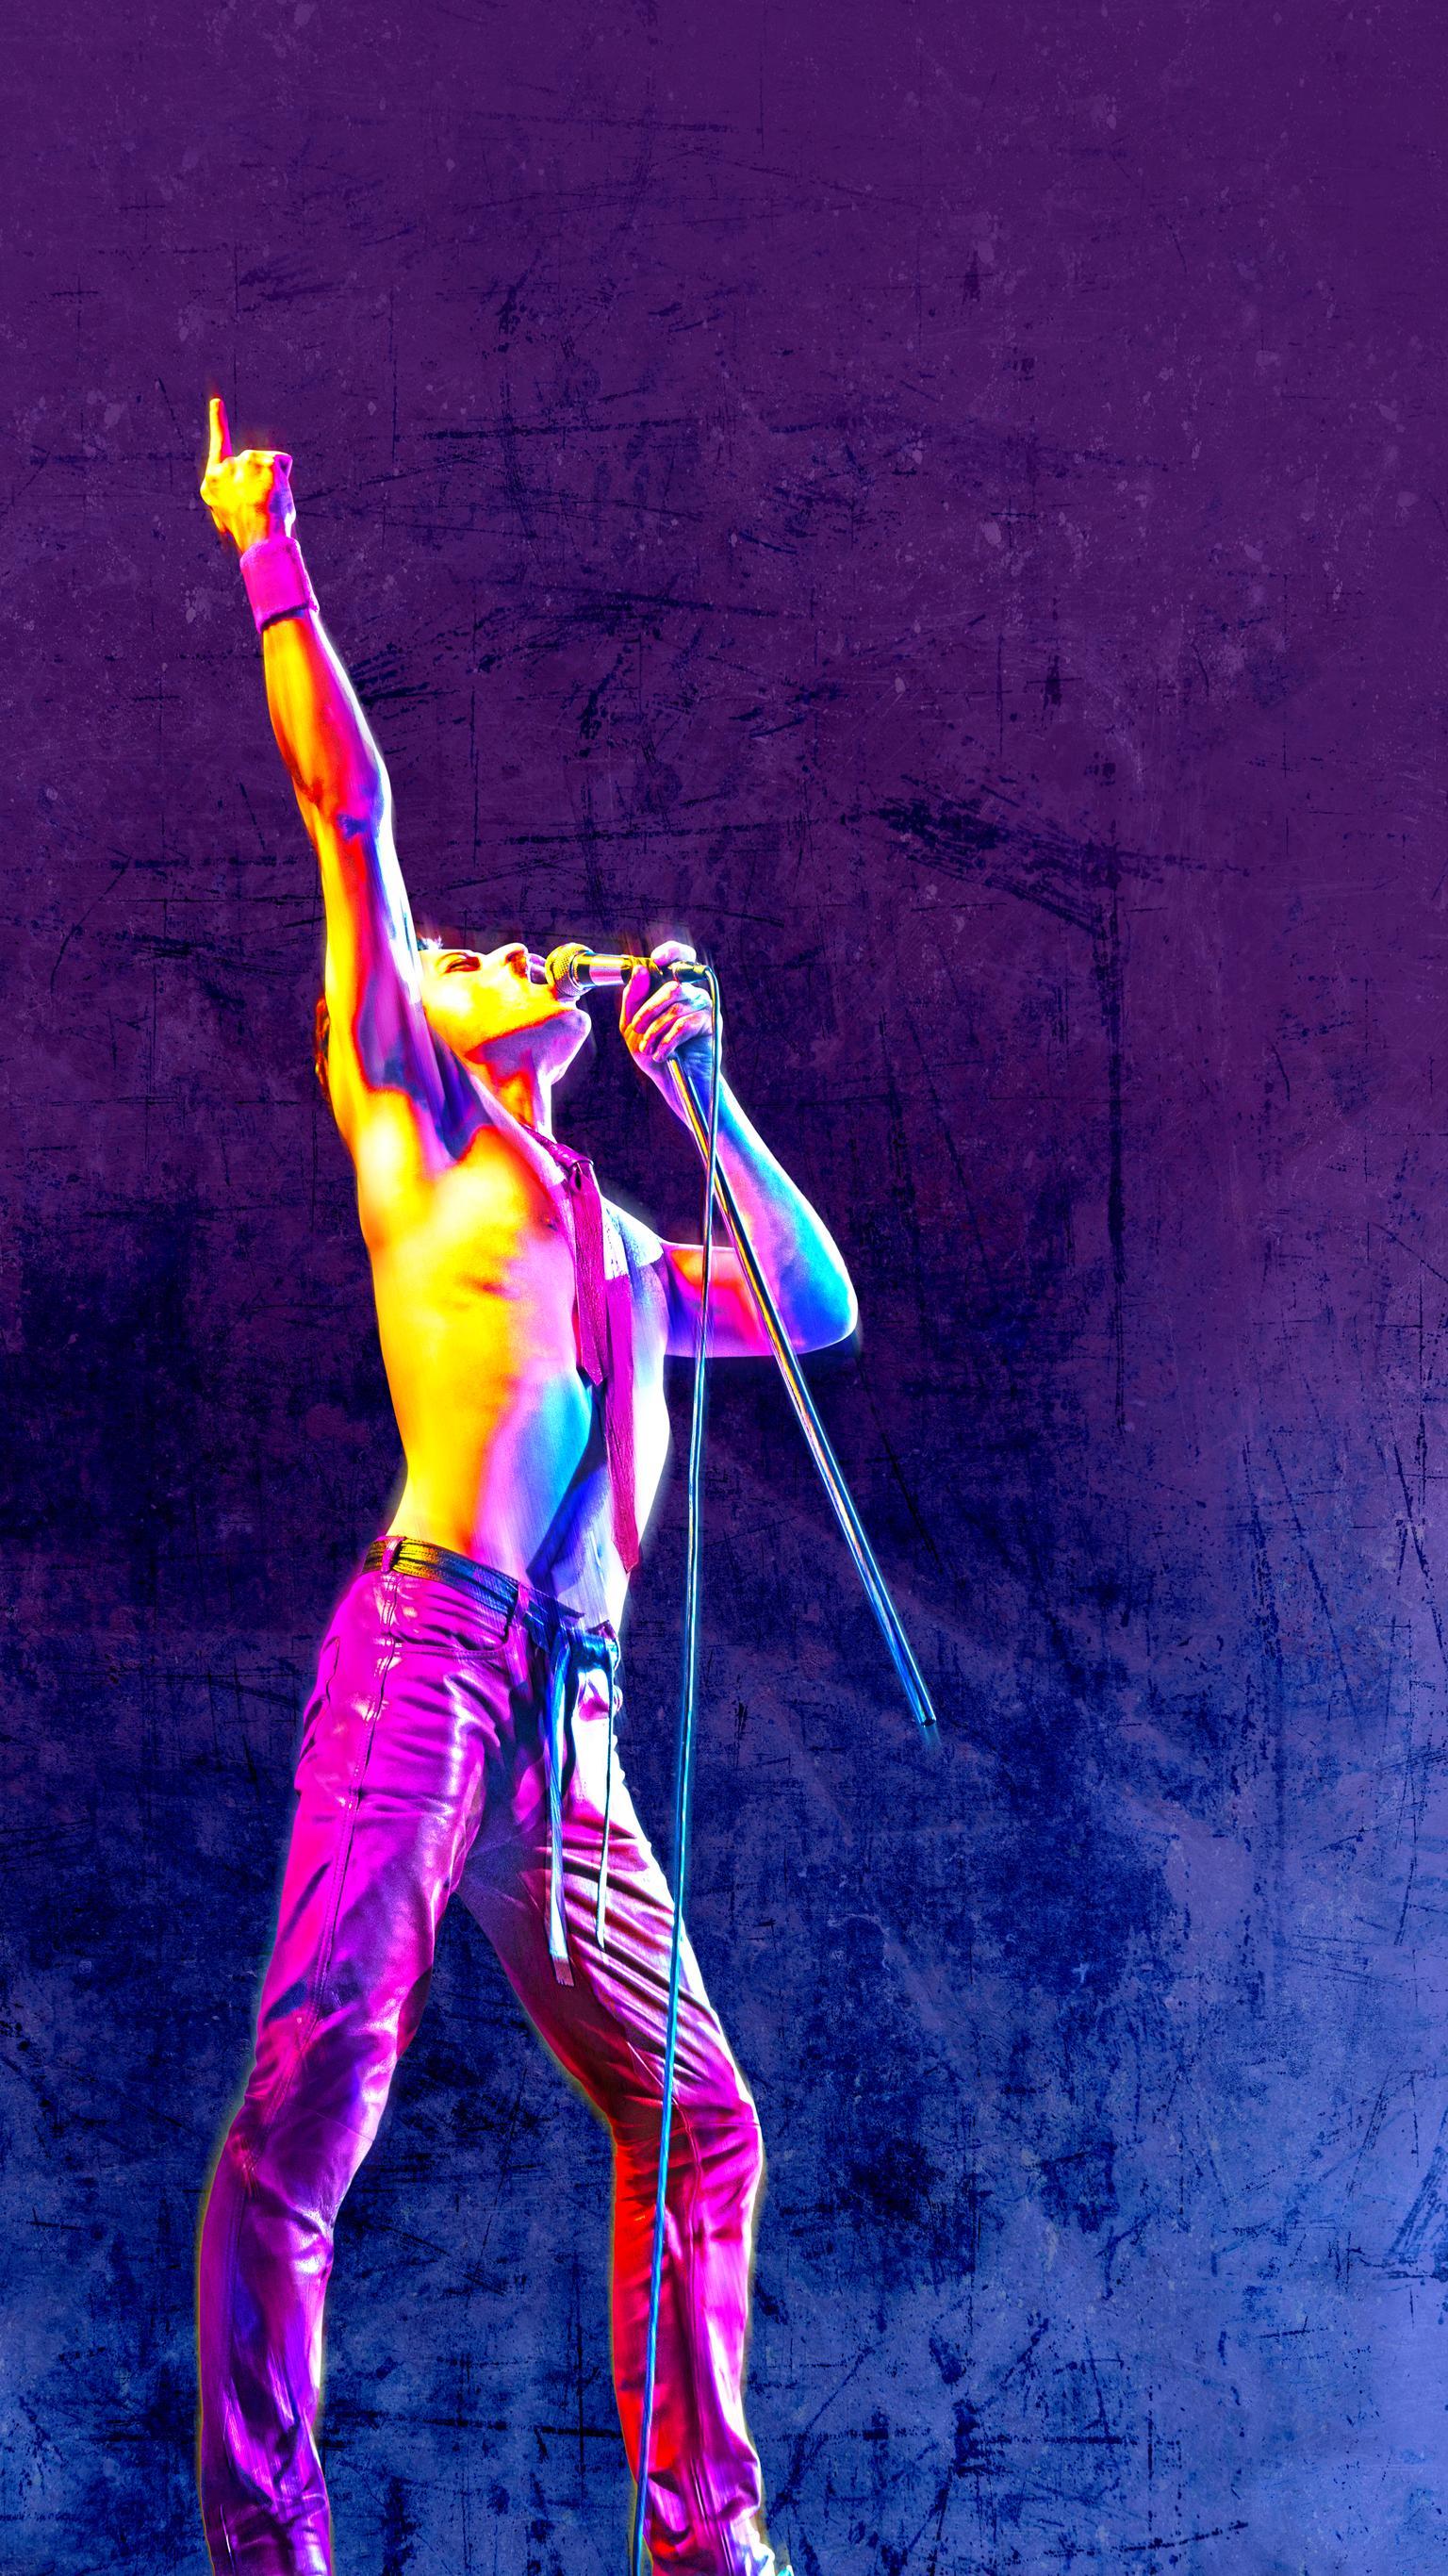 free Bohemian Rhapsody for iphone download